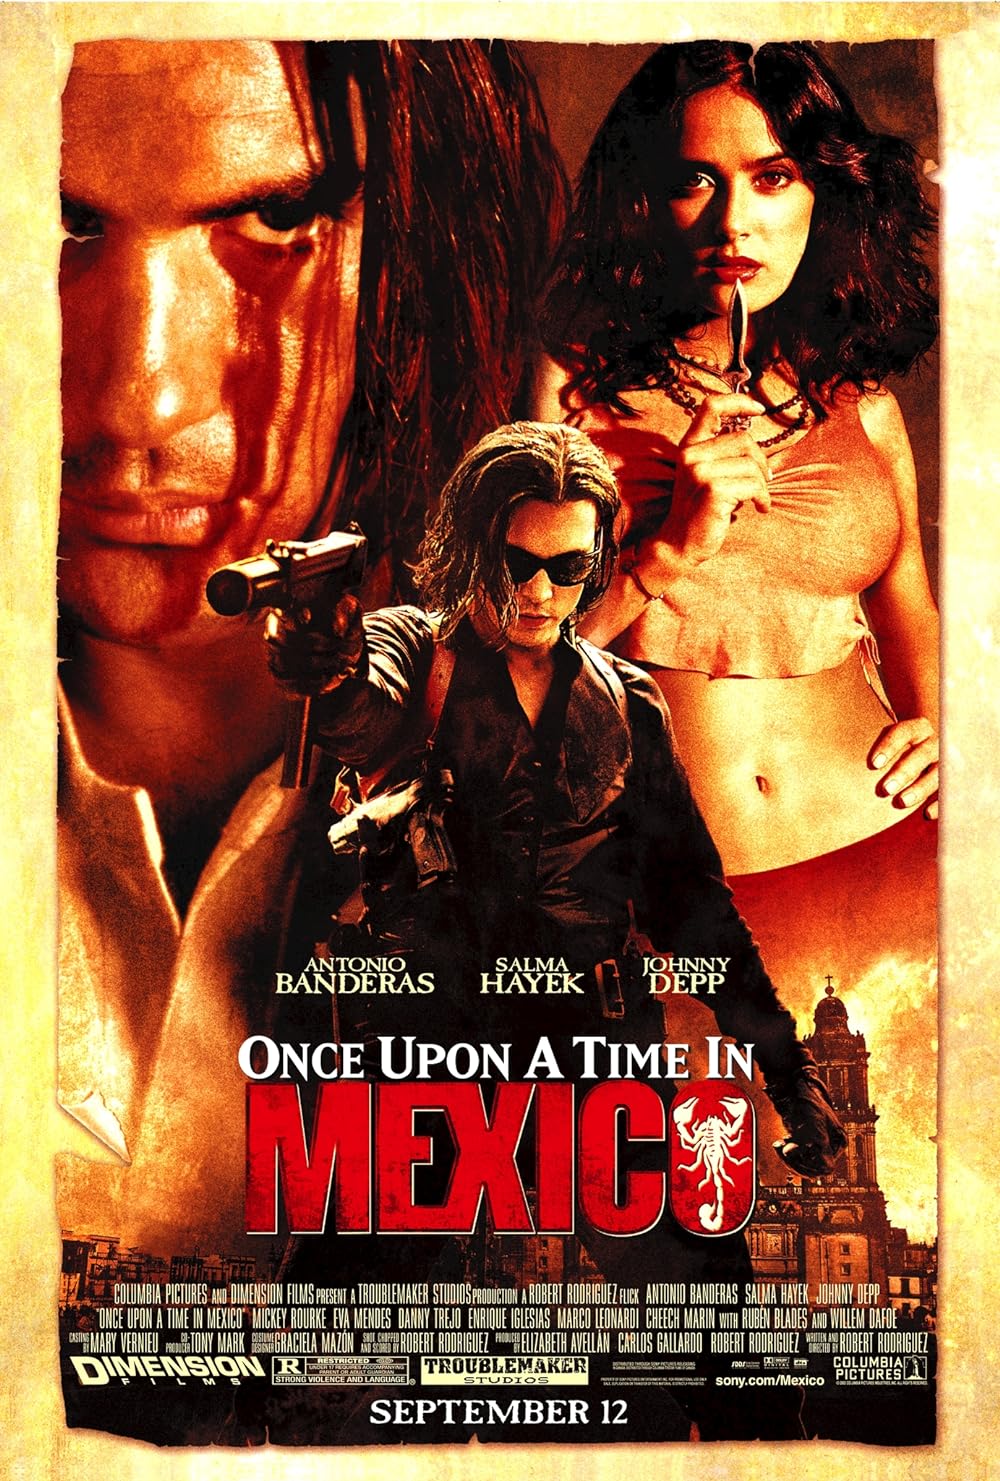 FULL MOVIE: Once Upon A Time In Mexico (2003)